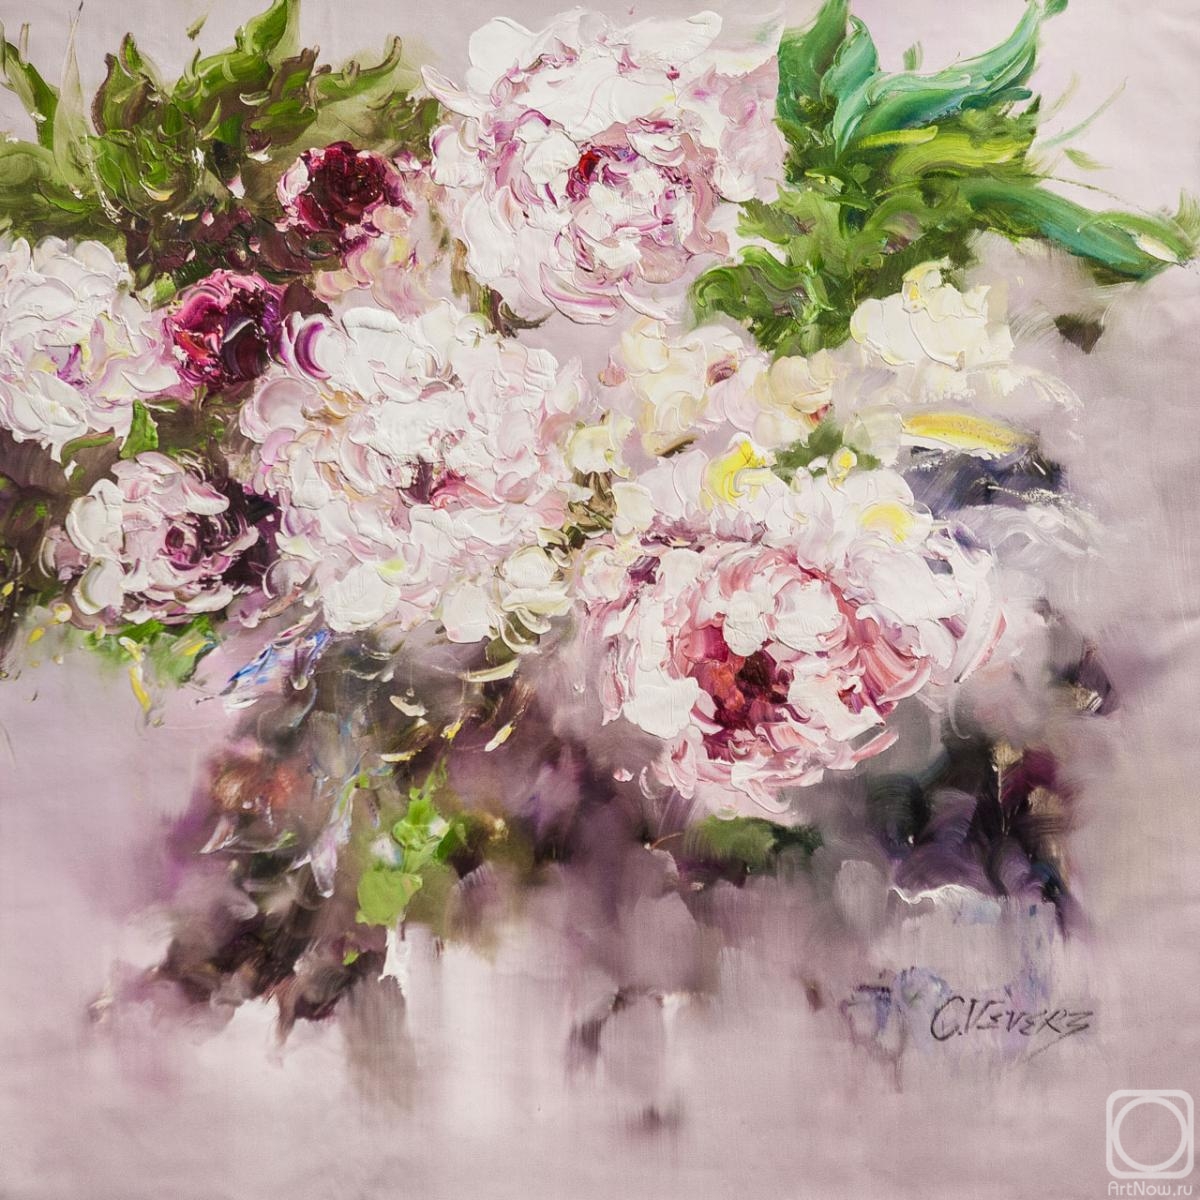 Vevers Christina. White peonies. The magic of color